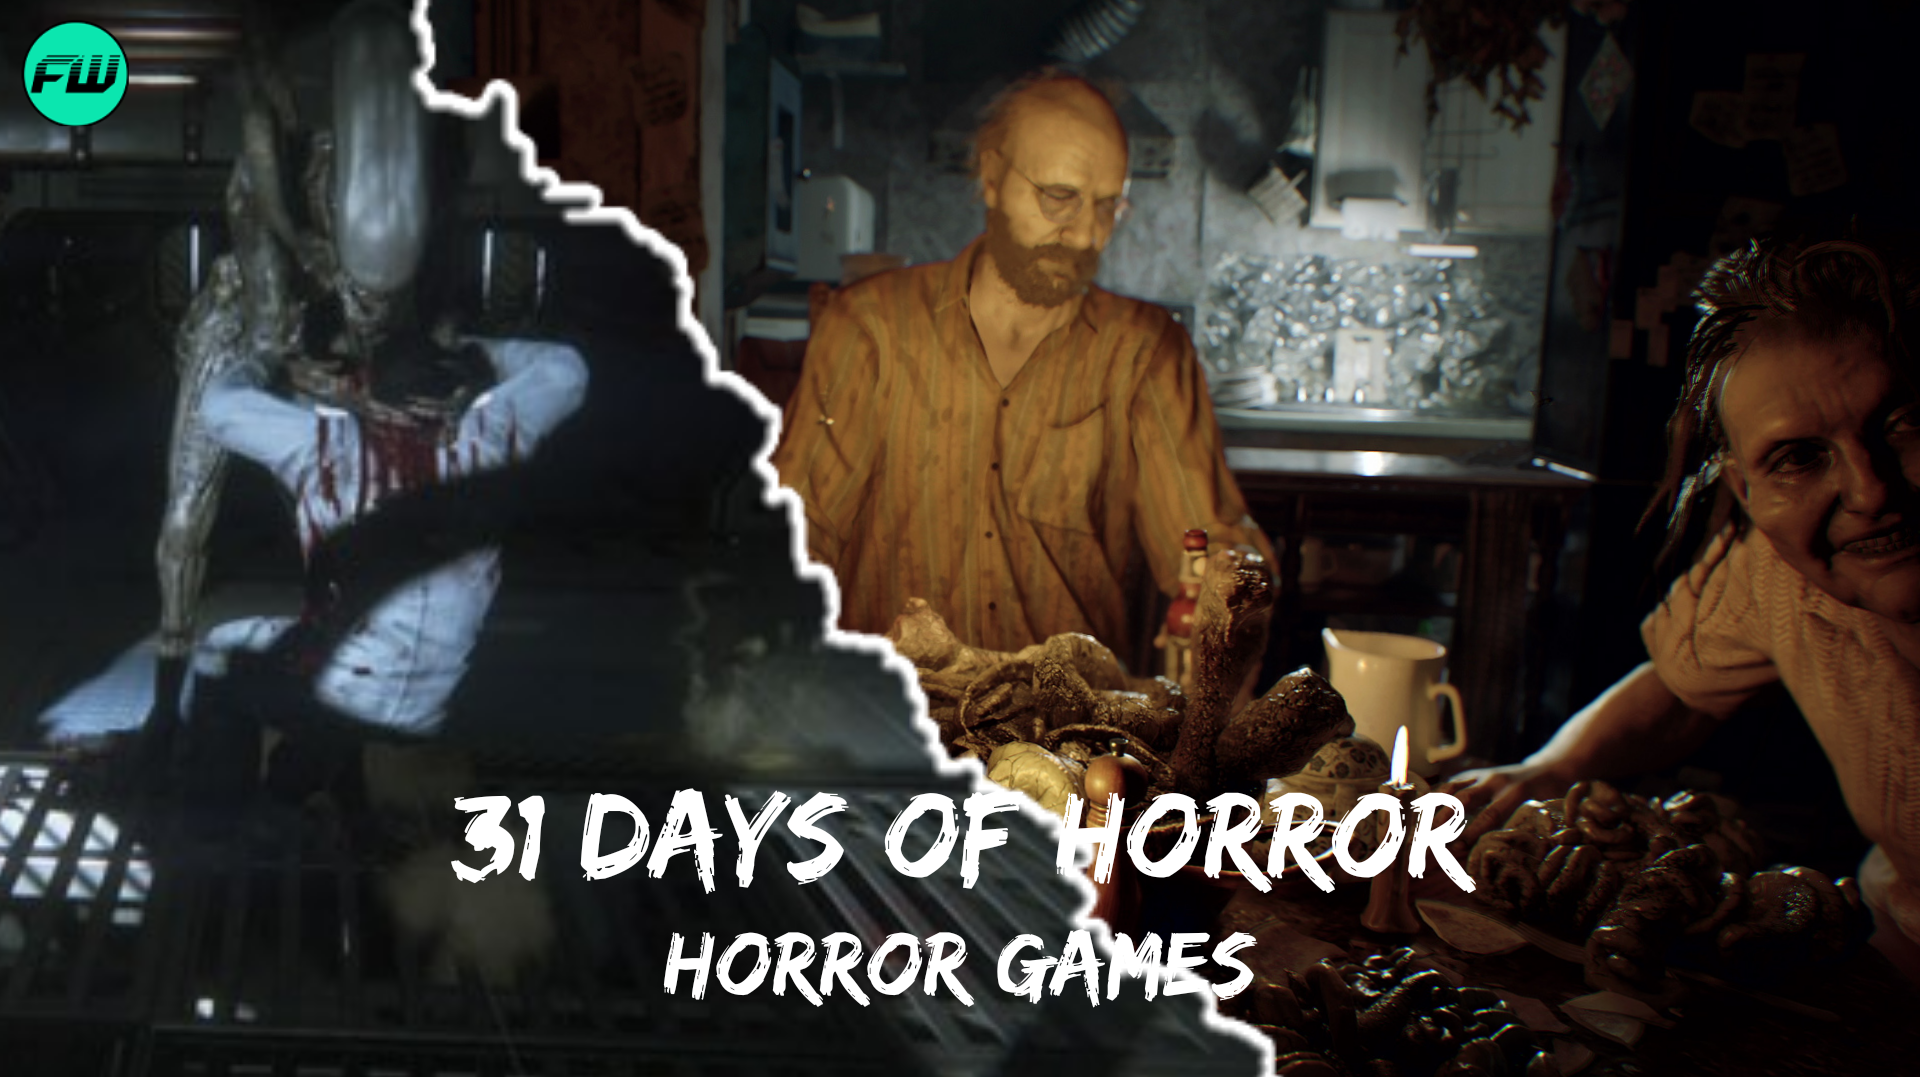 31 Days of Horror: 5 Horror Games That Will Terrify You Deeply